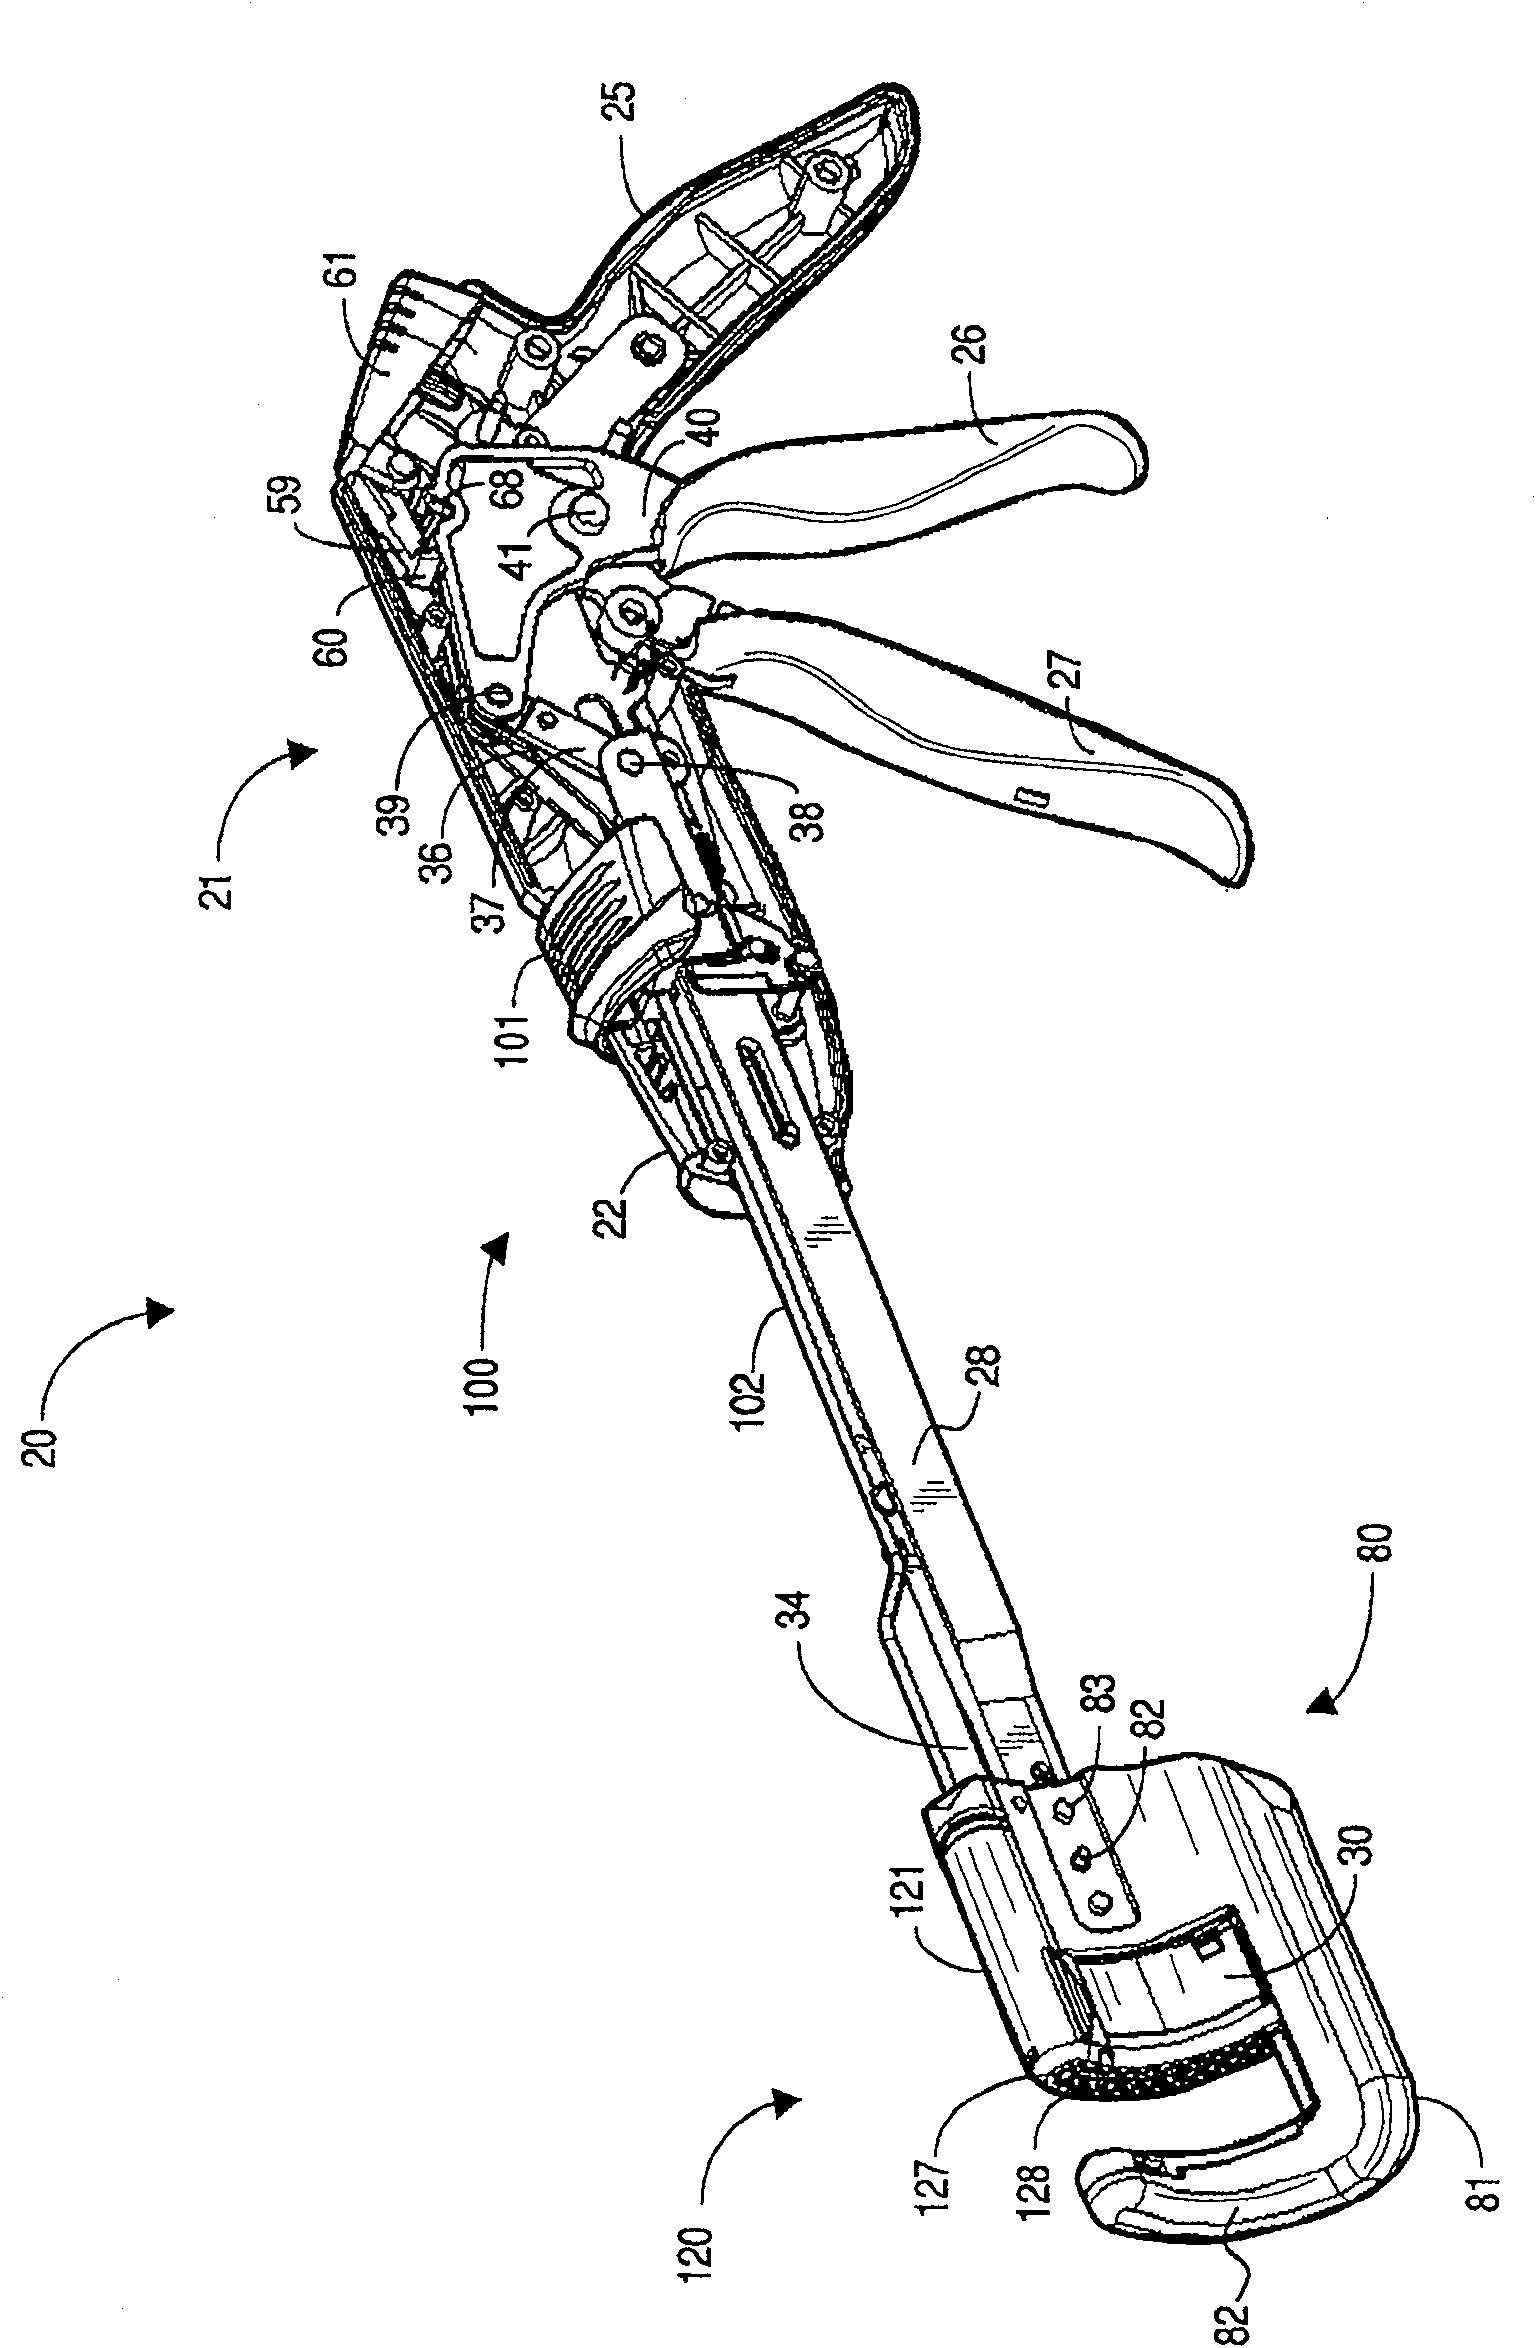 Curved cutter stapler with aligned tissue retention feature